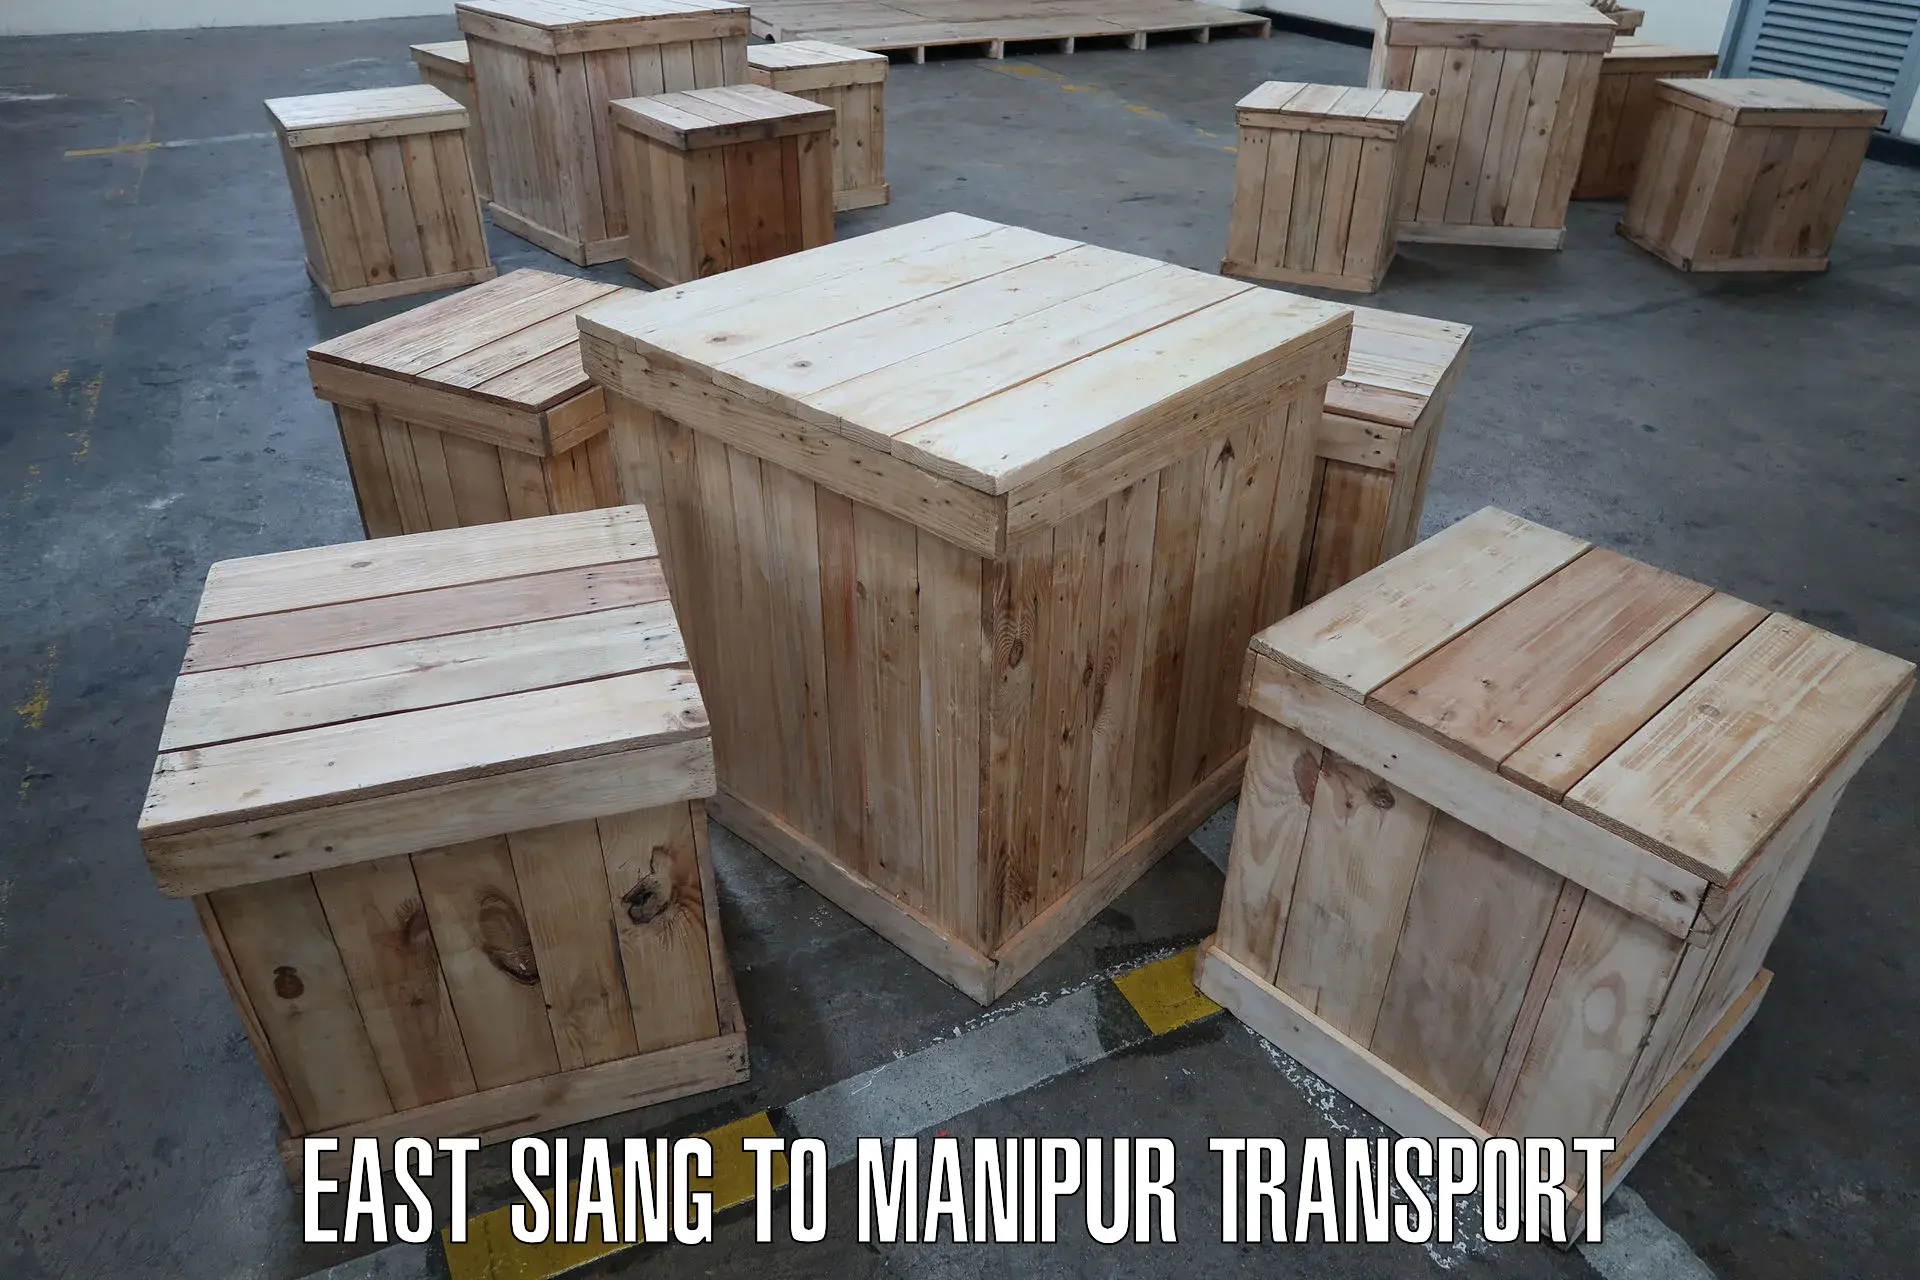 Parcel transport services East Siang to Manipur